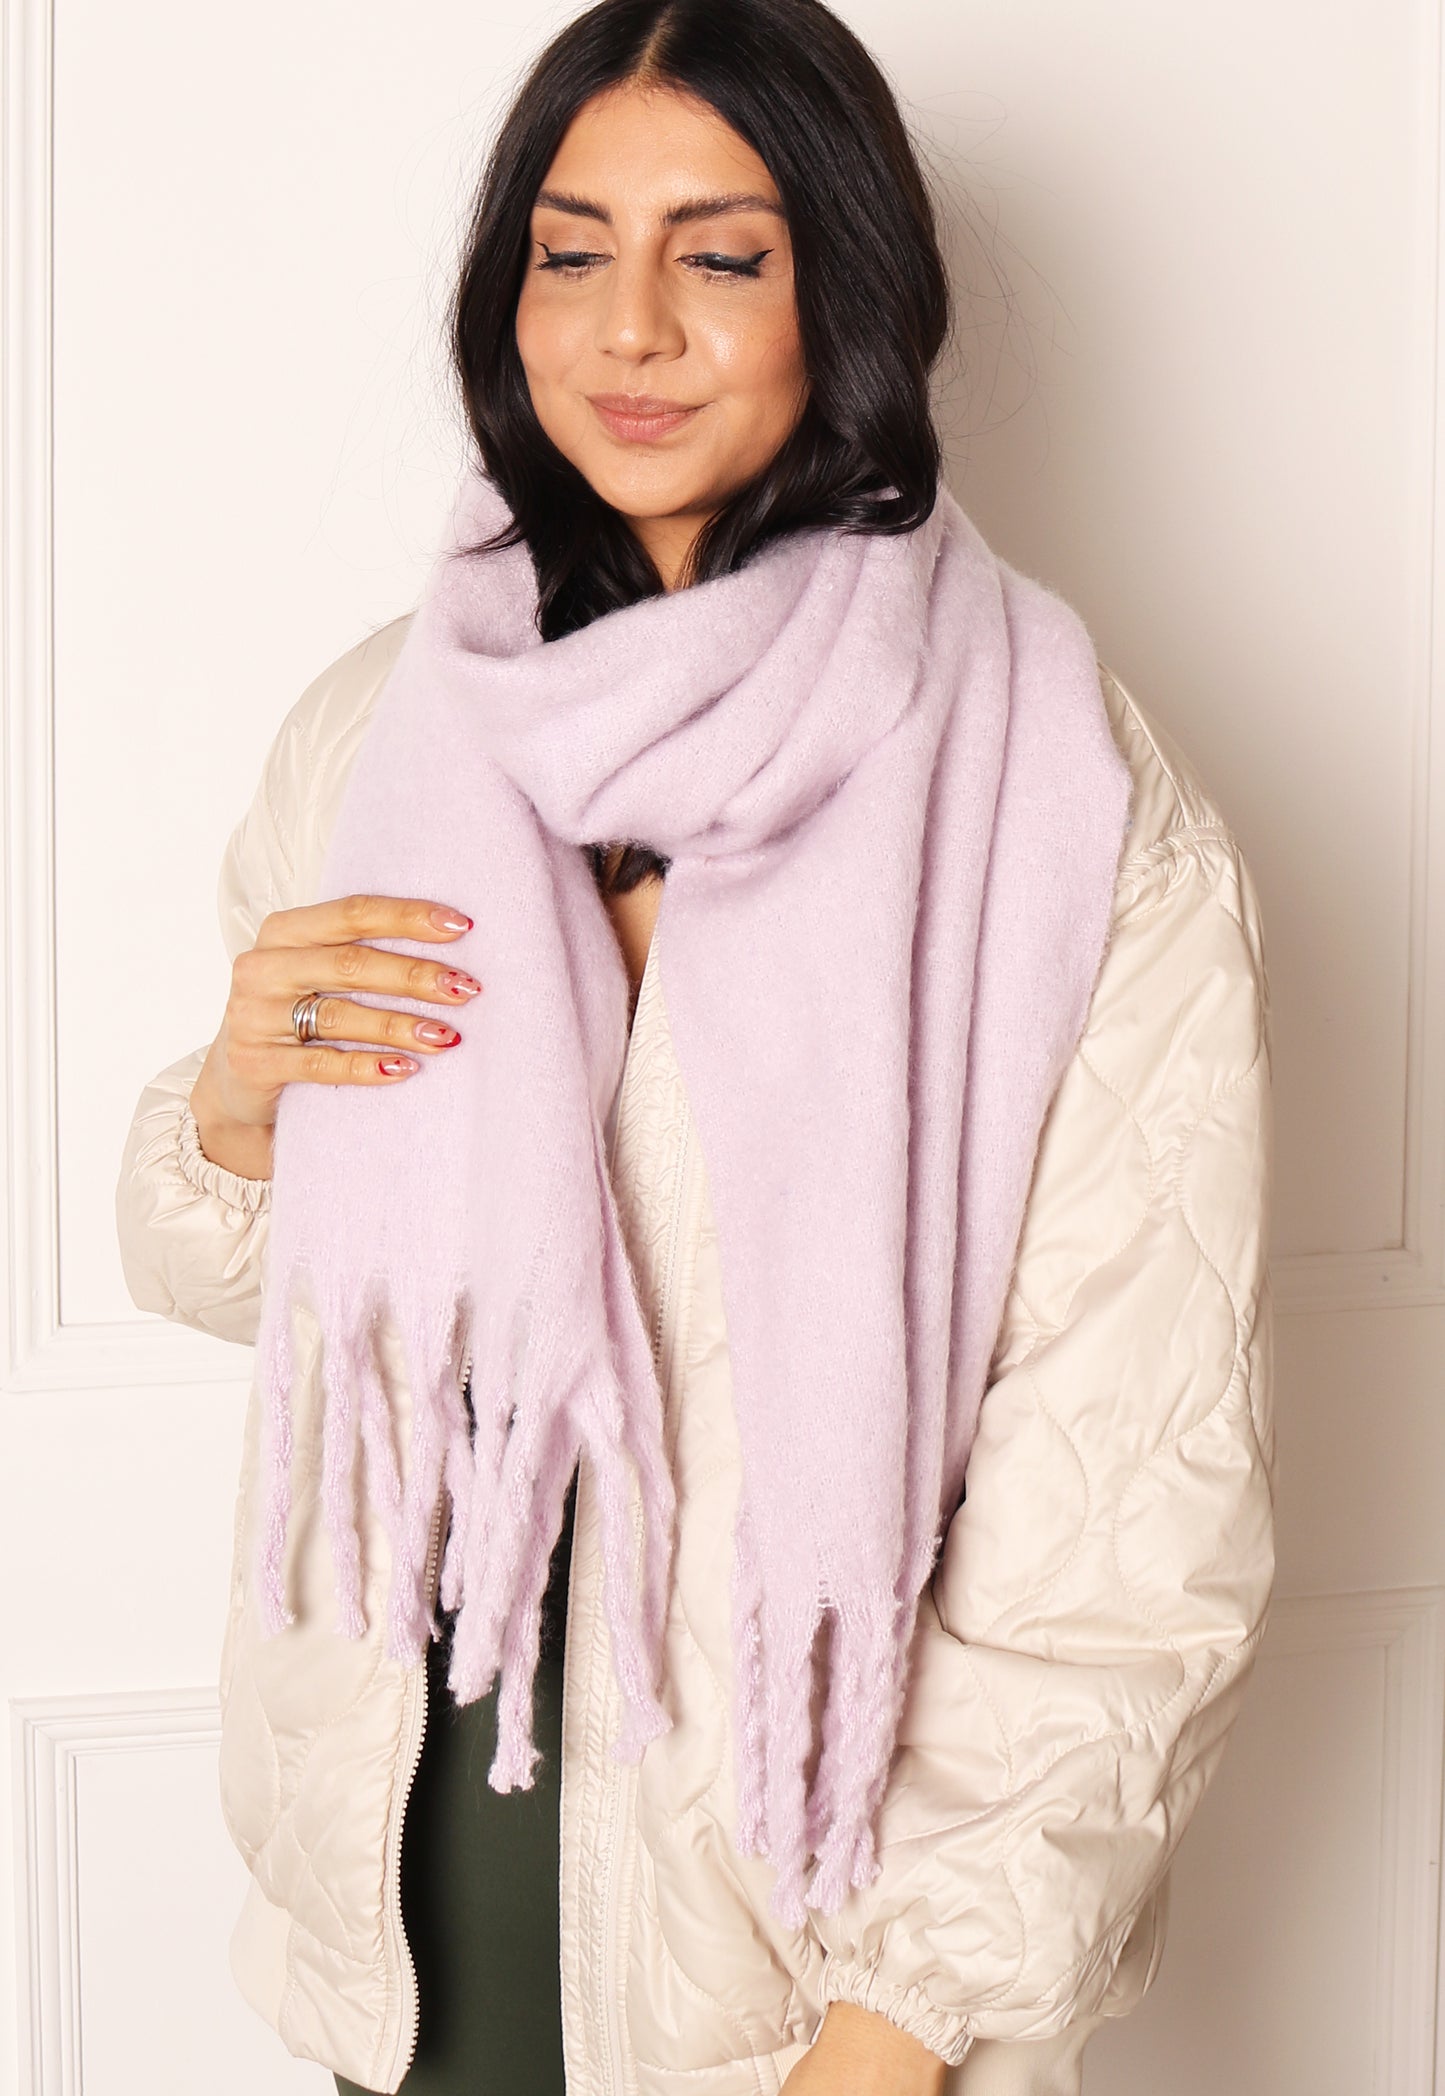 VERO MODA Brushed Scarf with Tassels in Lilac - concretebartops